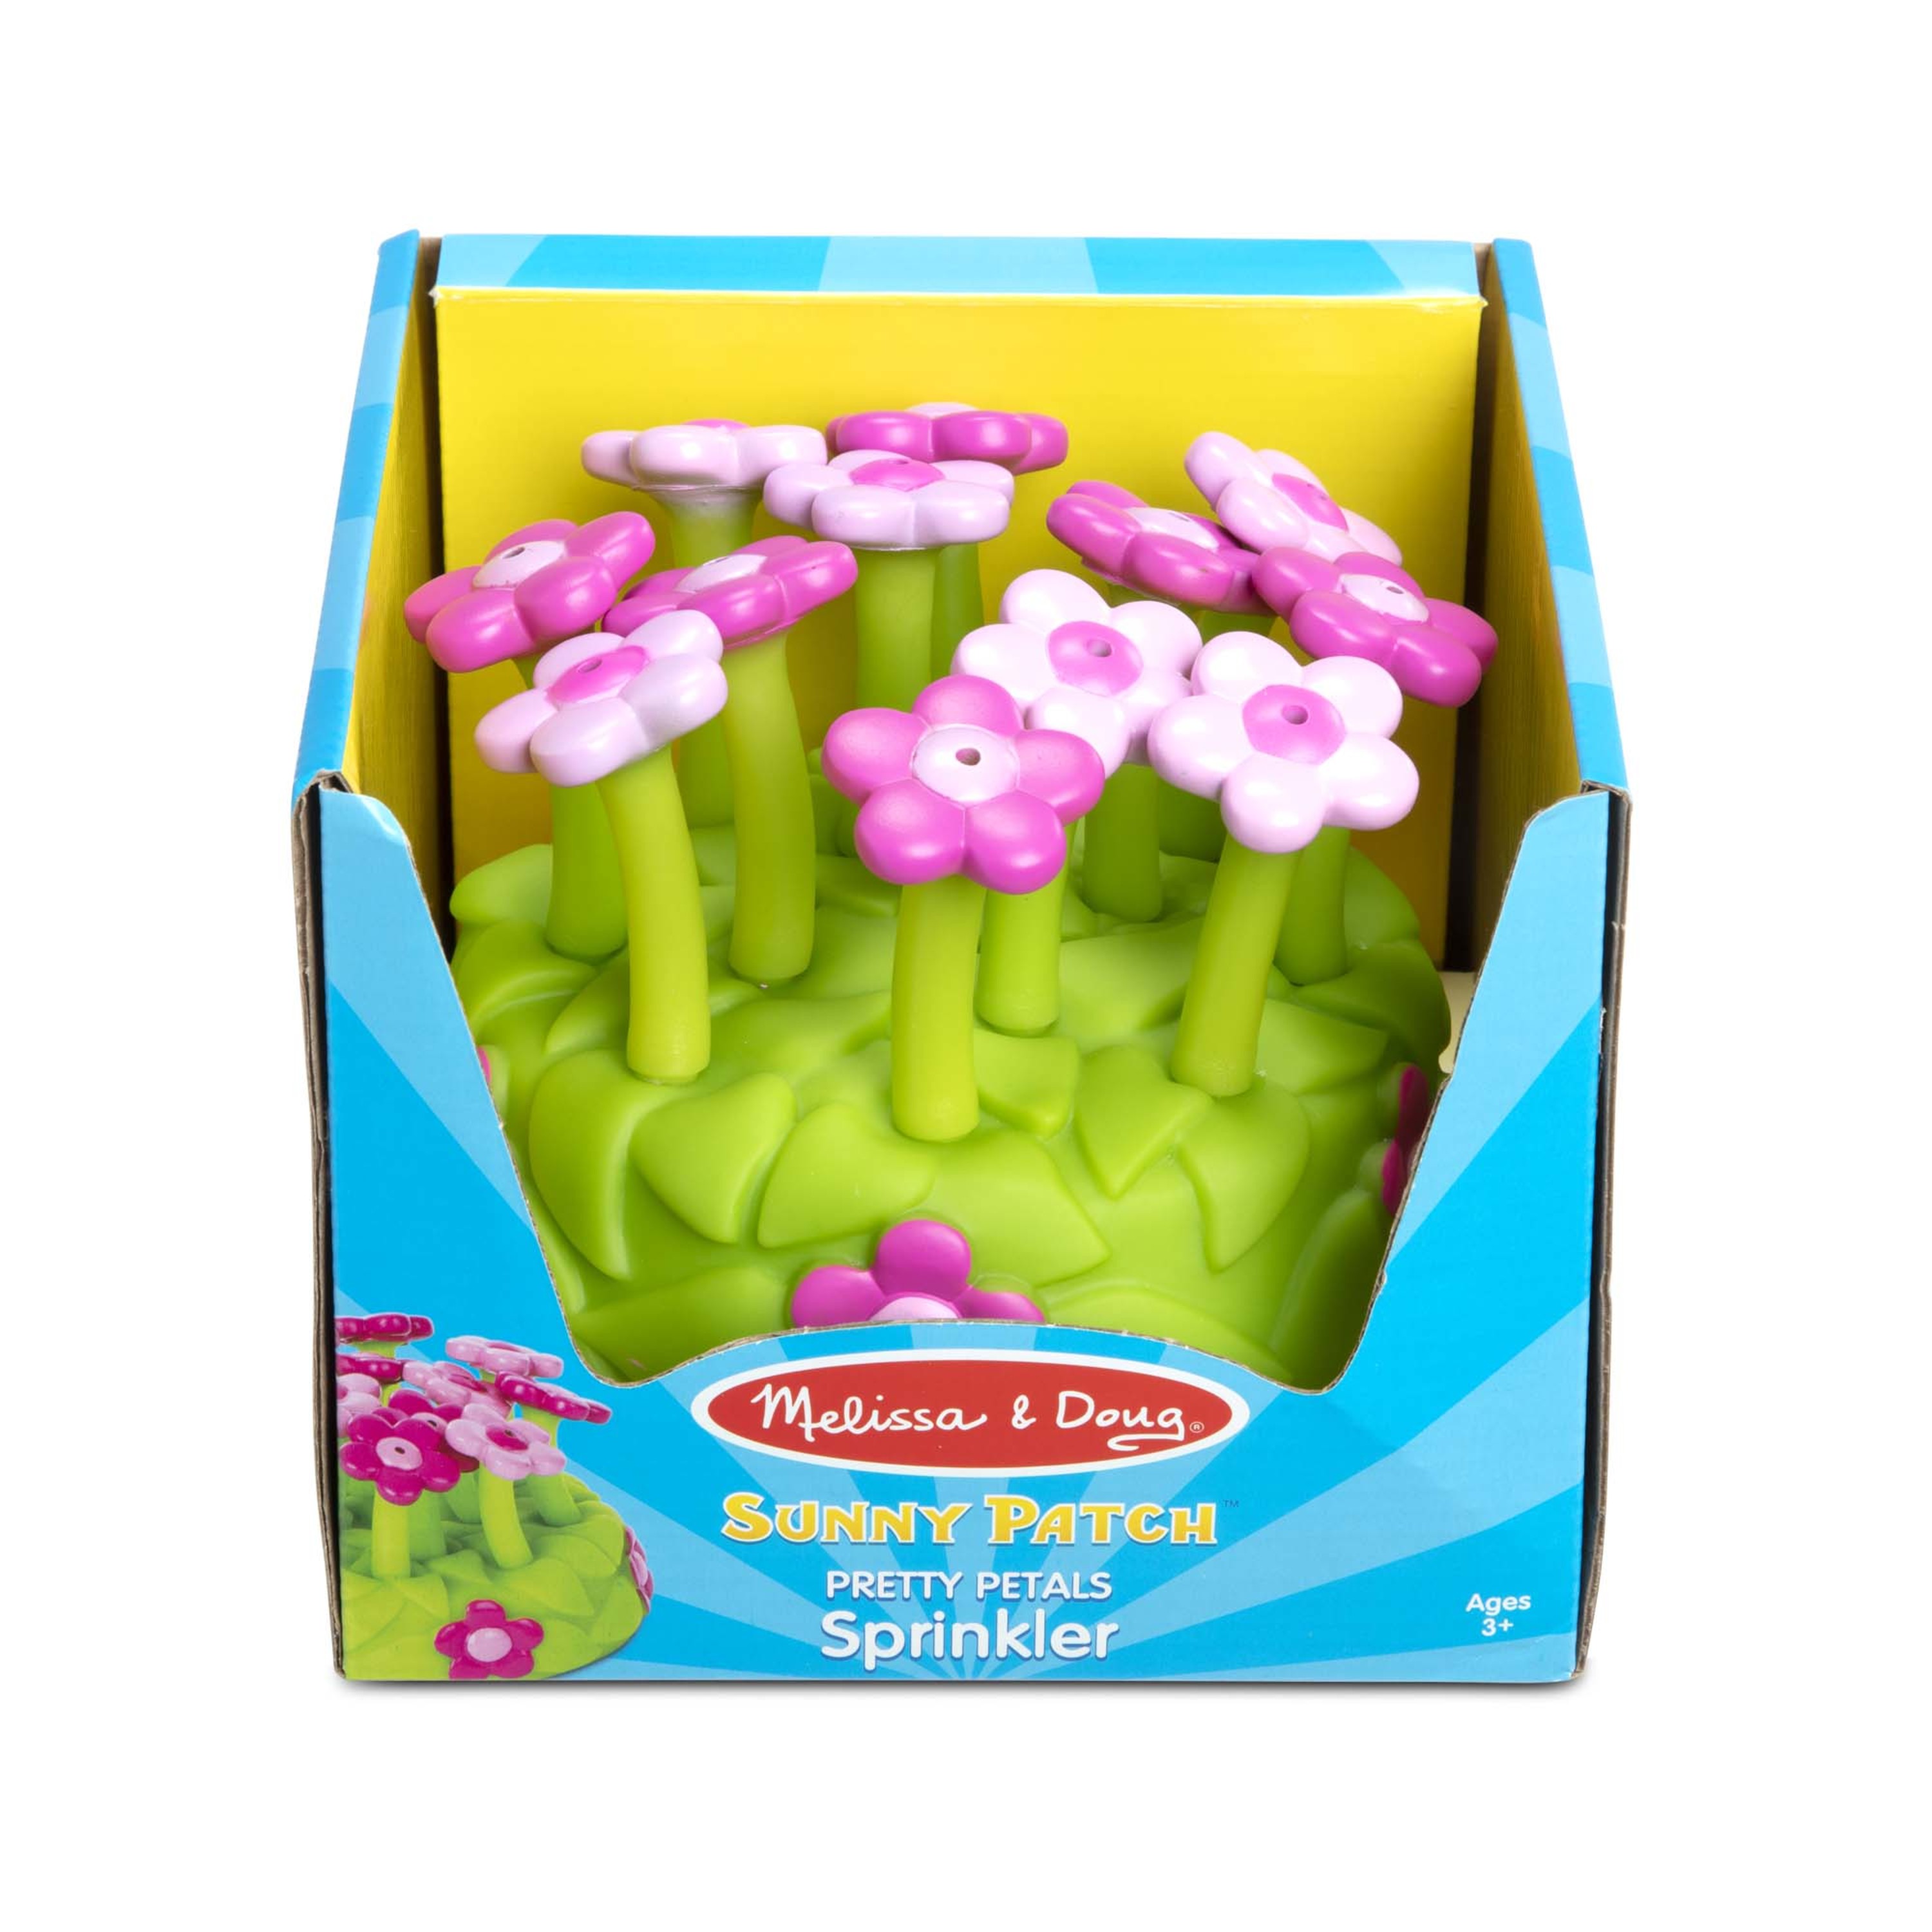 Melissa & Doug Sunny Patch Pretty Petals Flower Sprinkler Toy With Hose Attachment - image 3 of 9